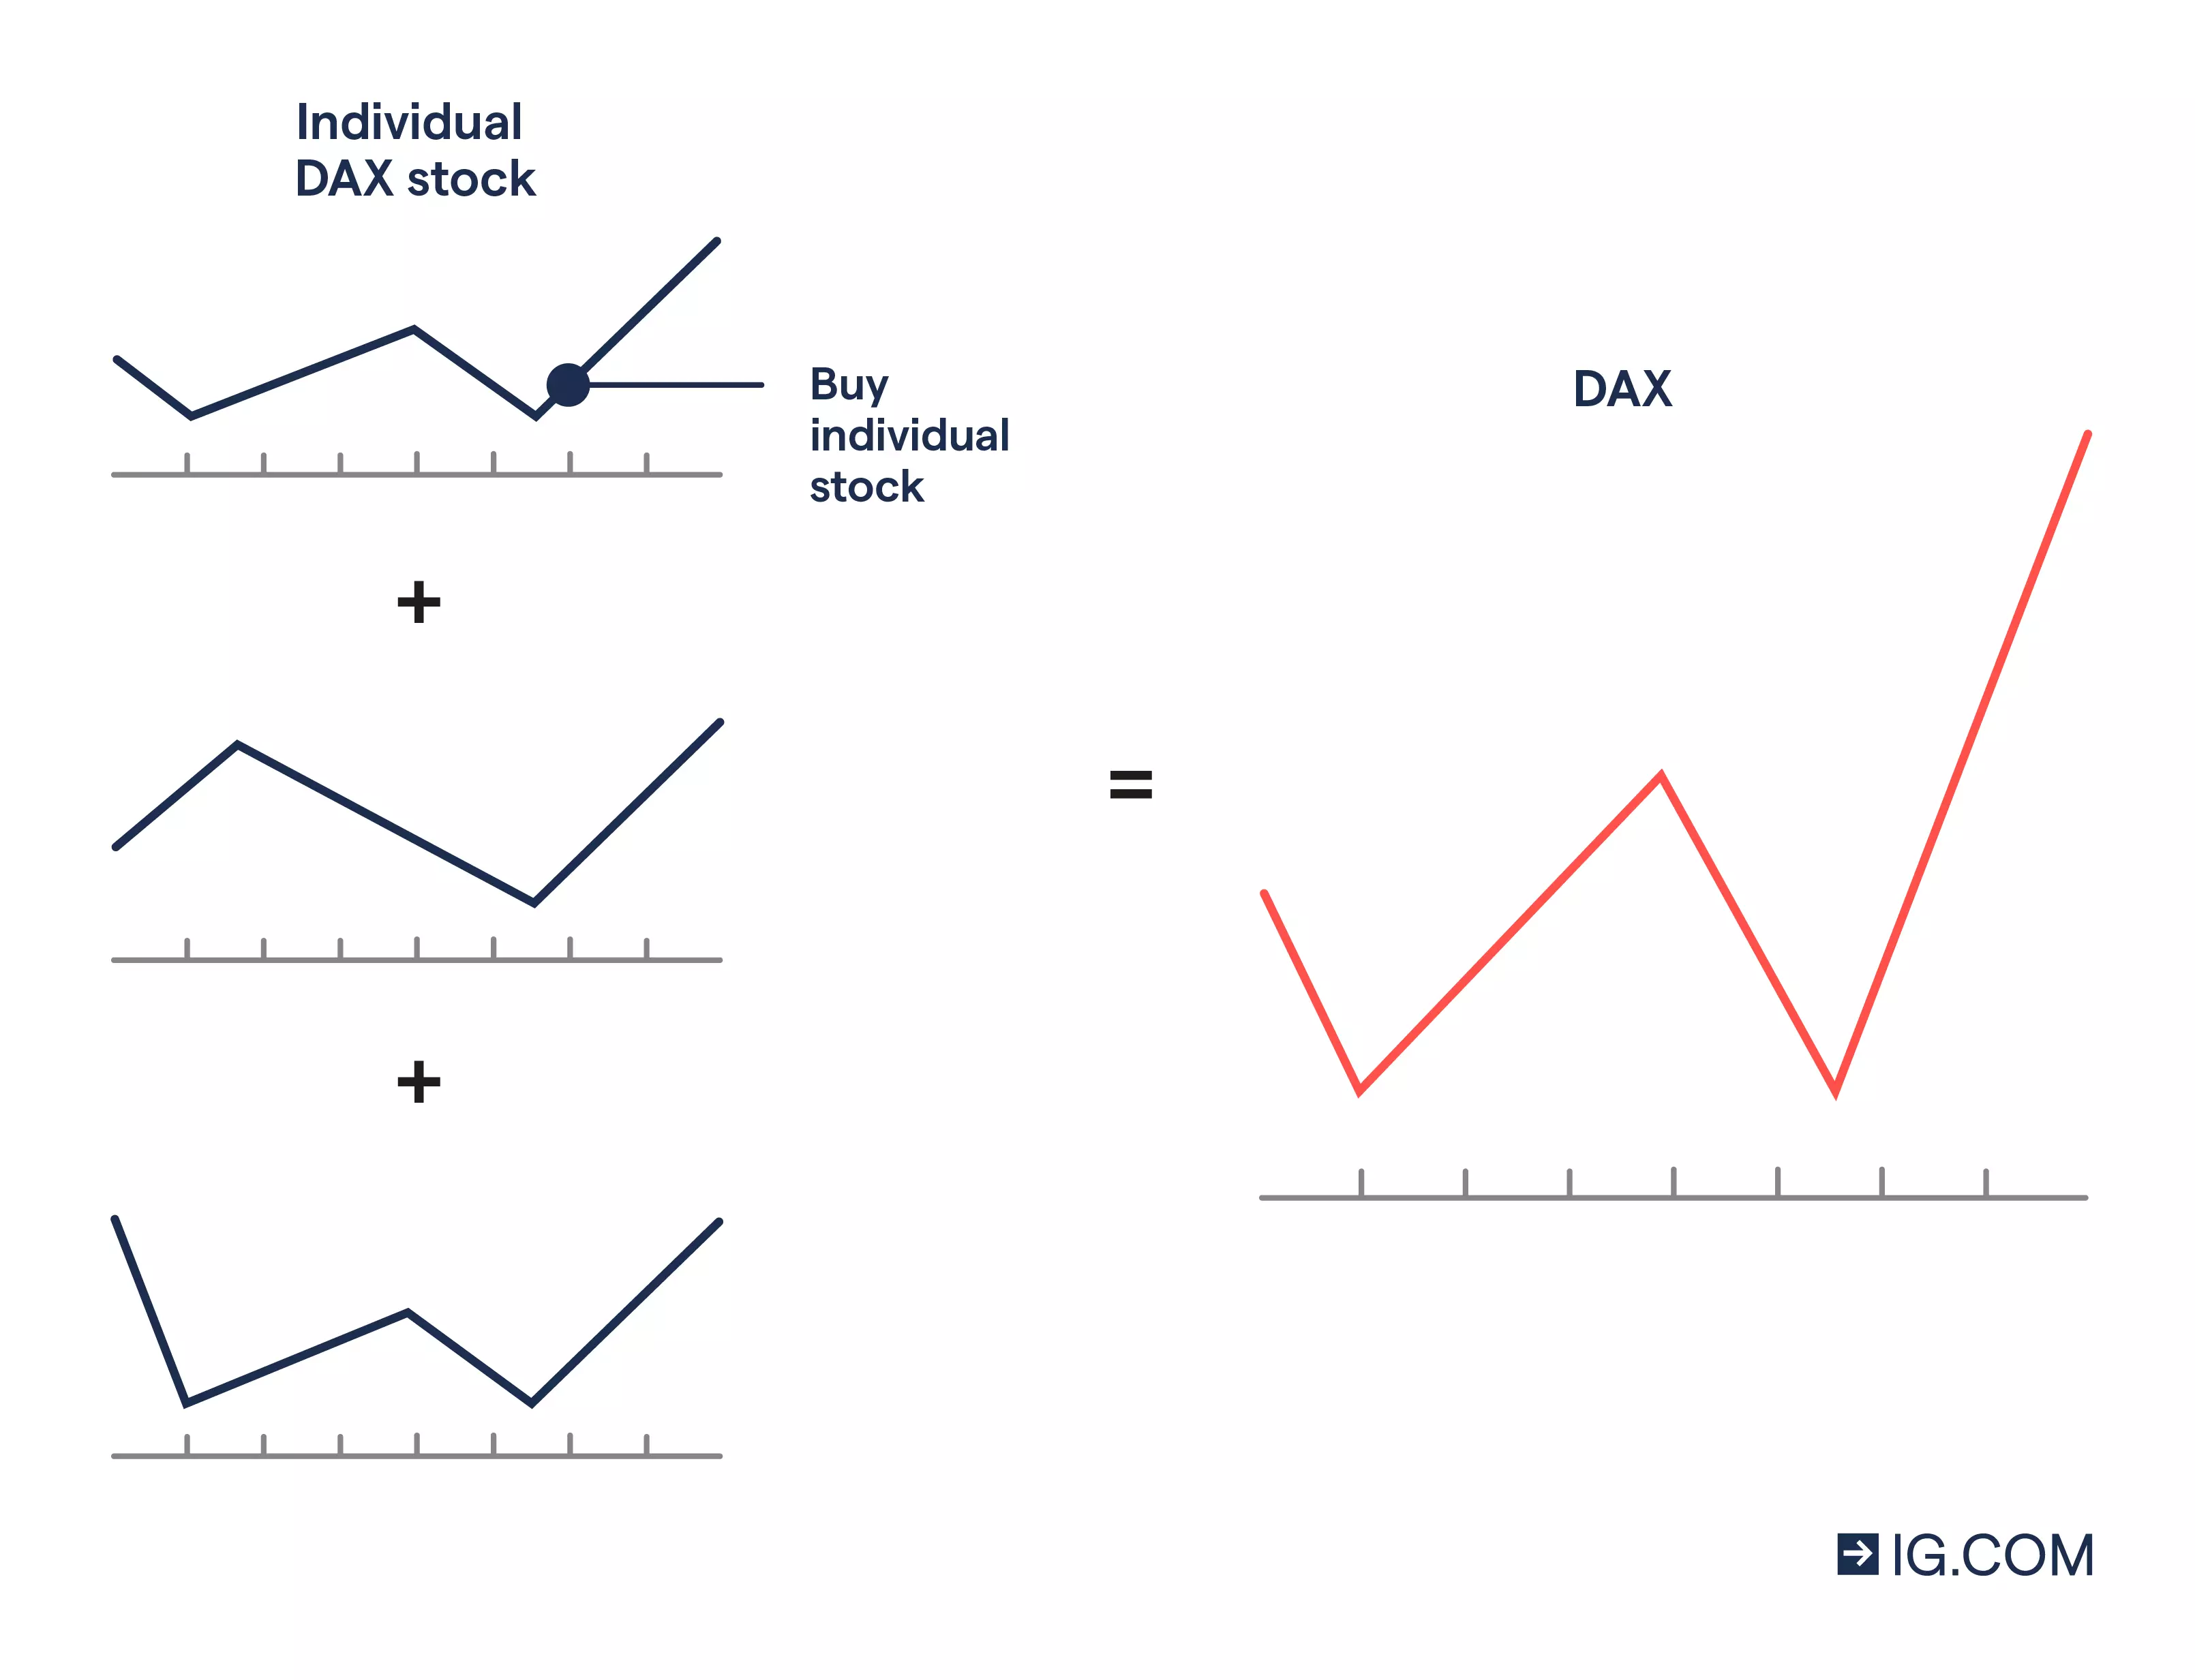 Individual DAX stocks making up the DAX index